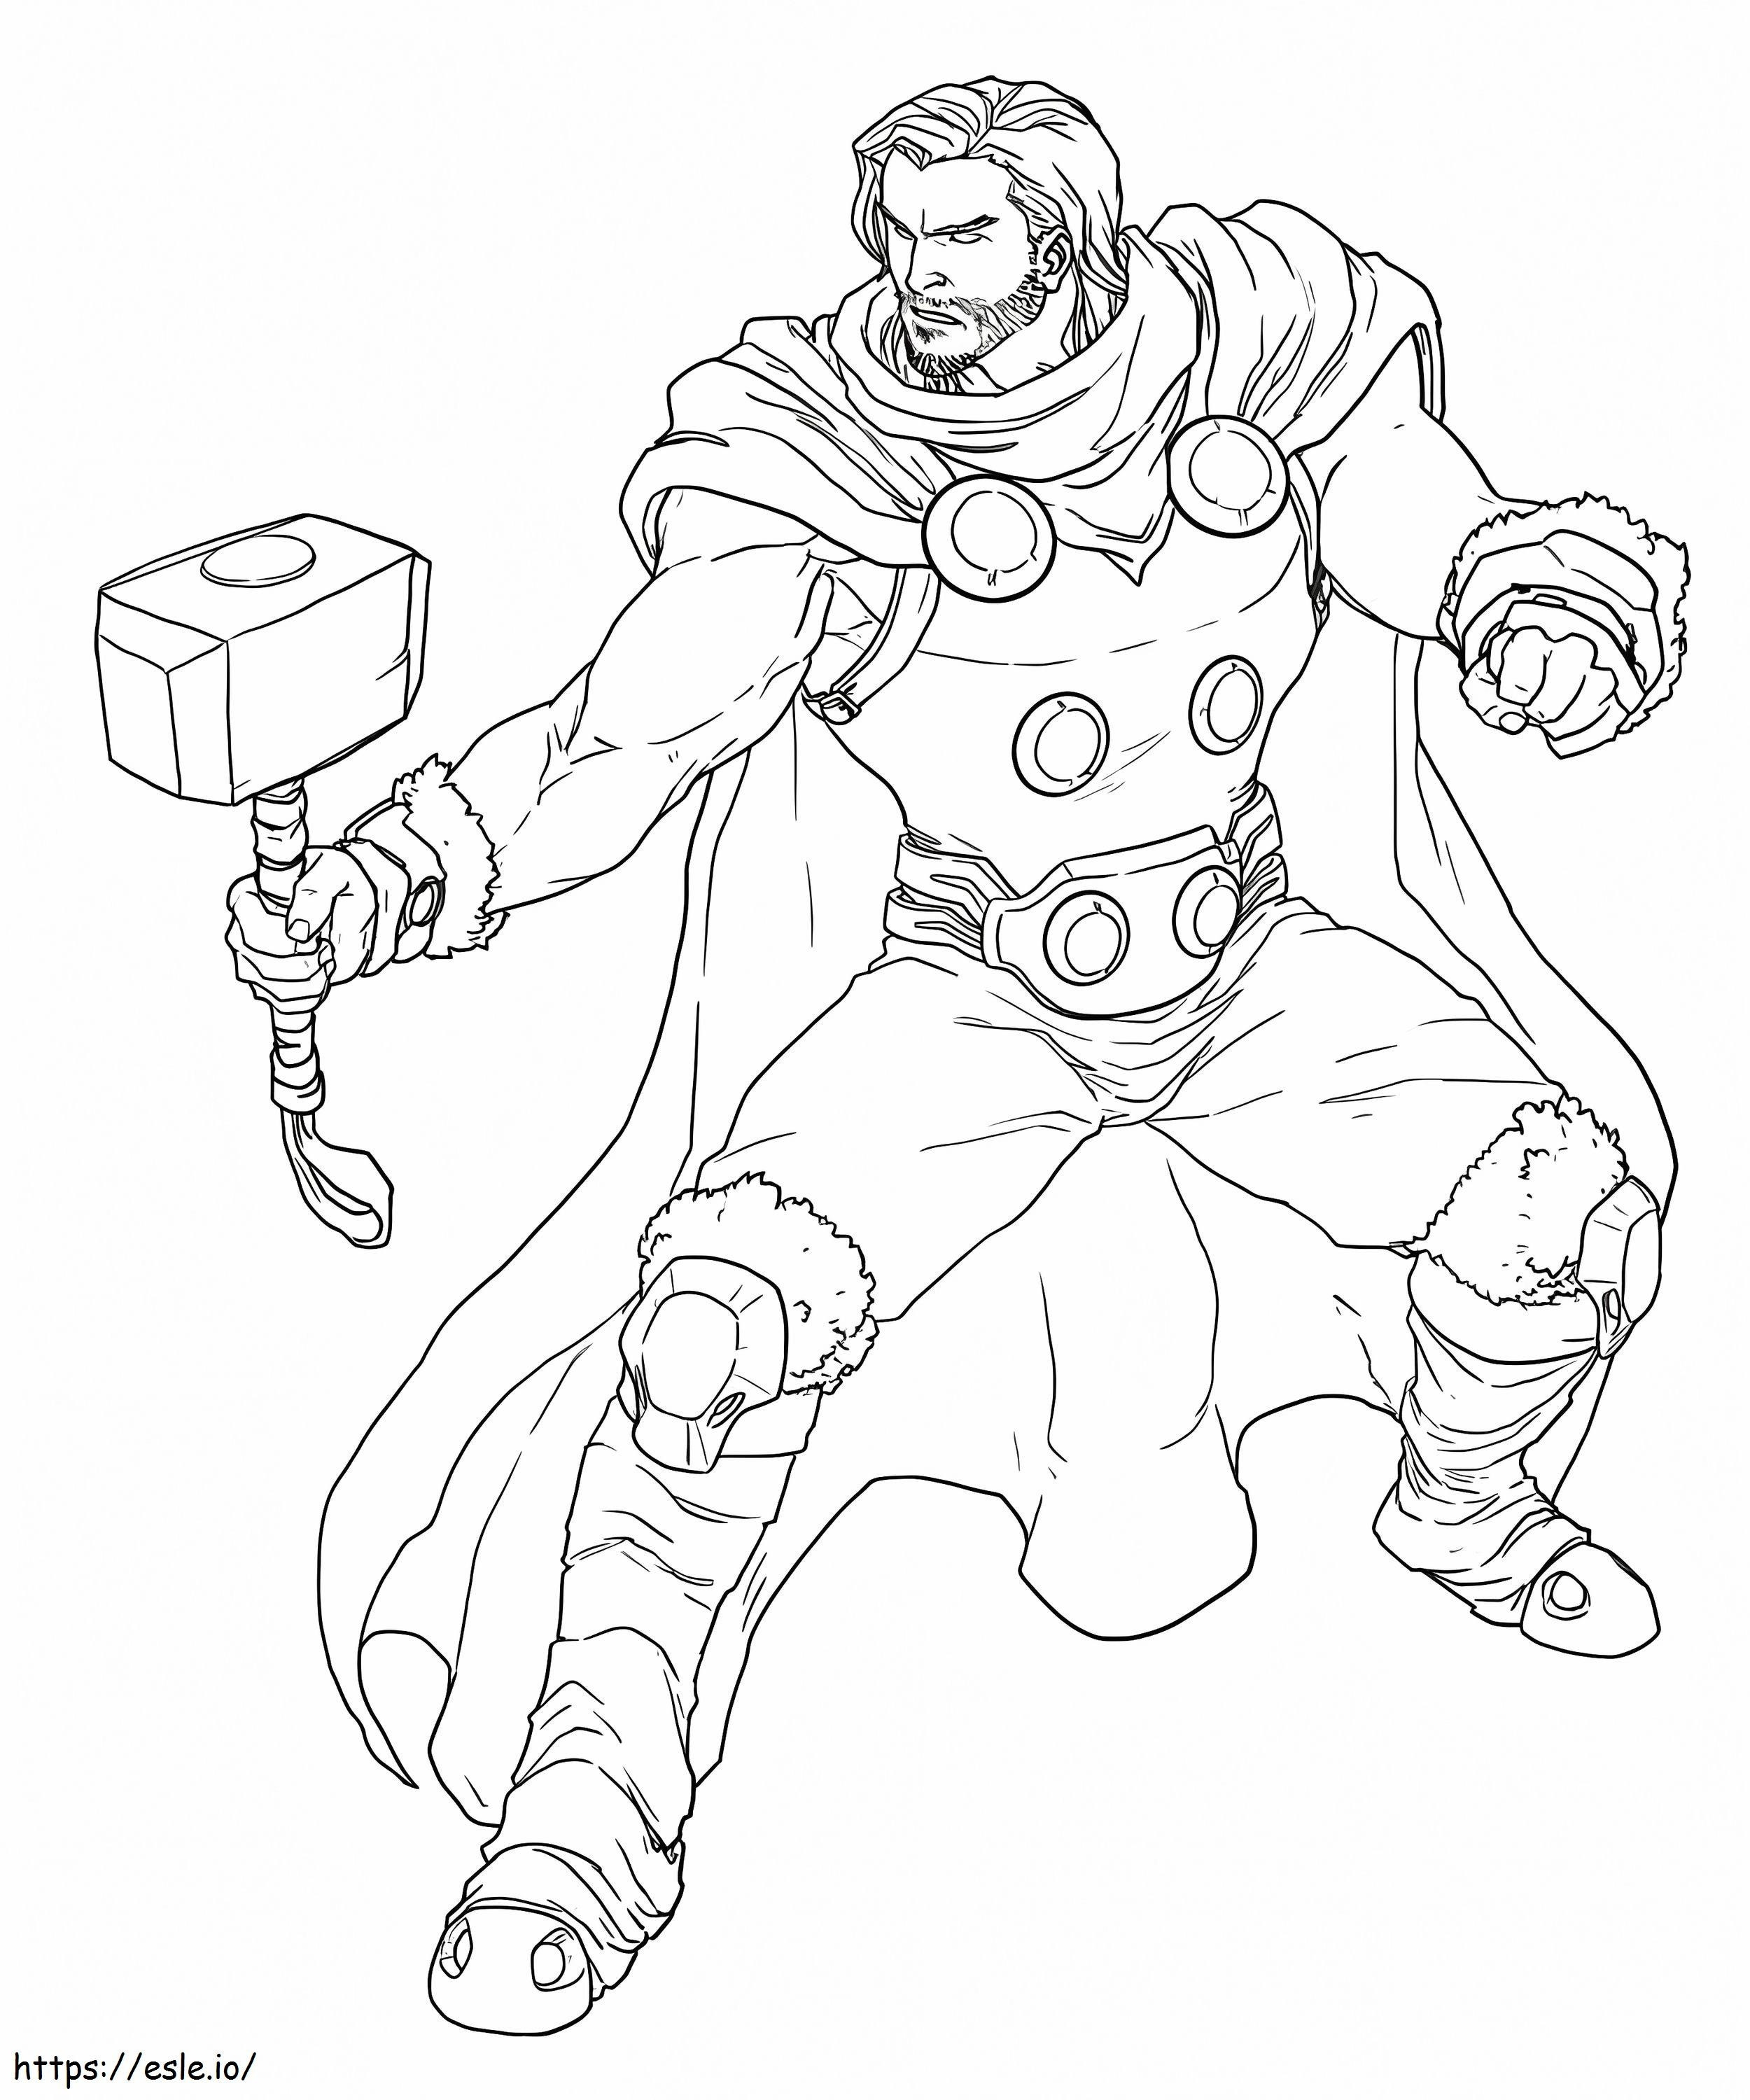 King Thor coloring page